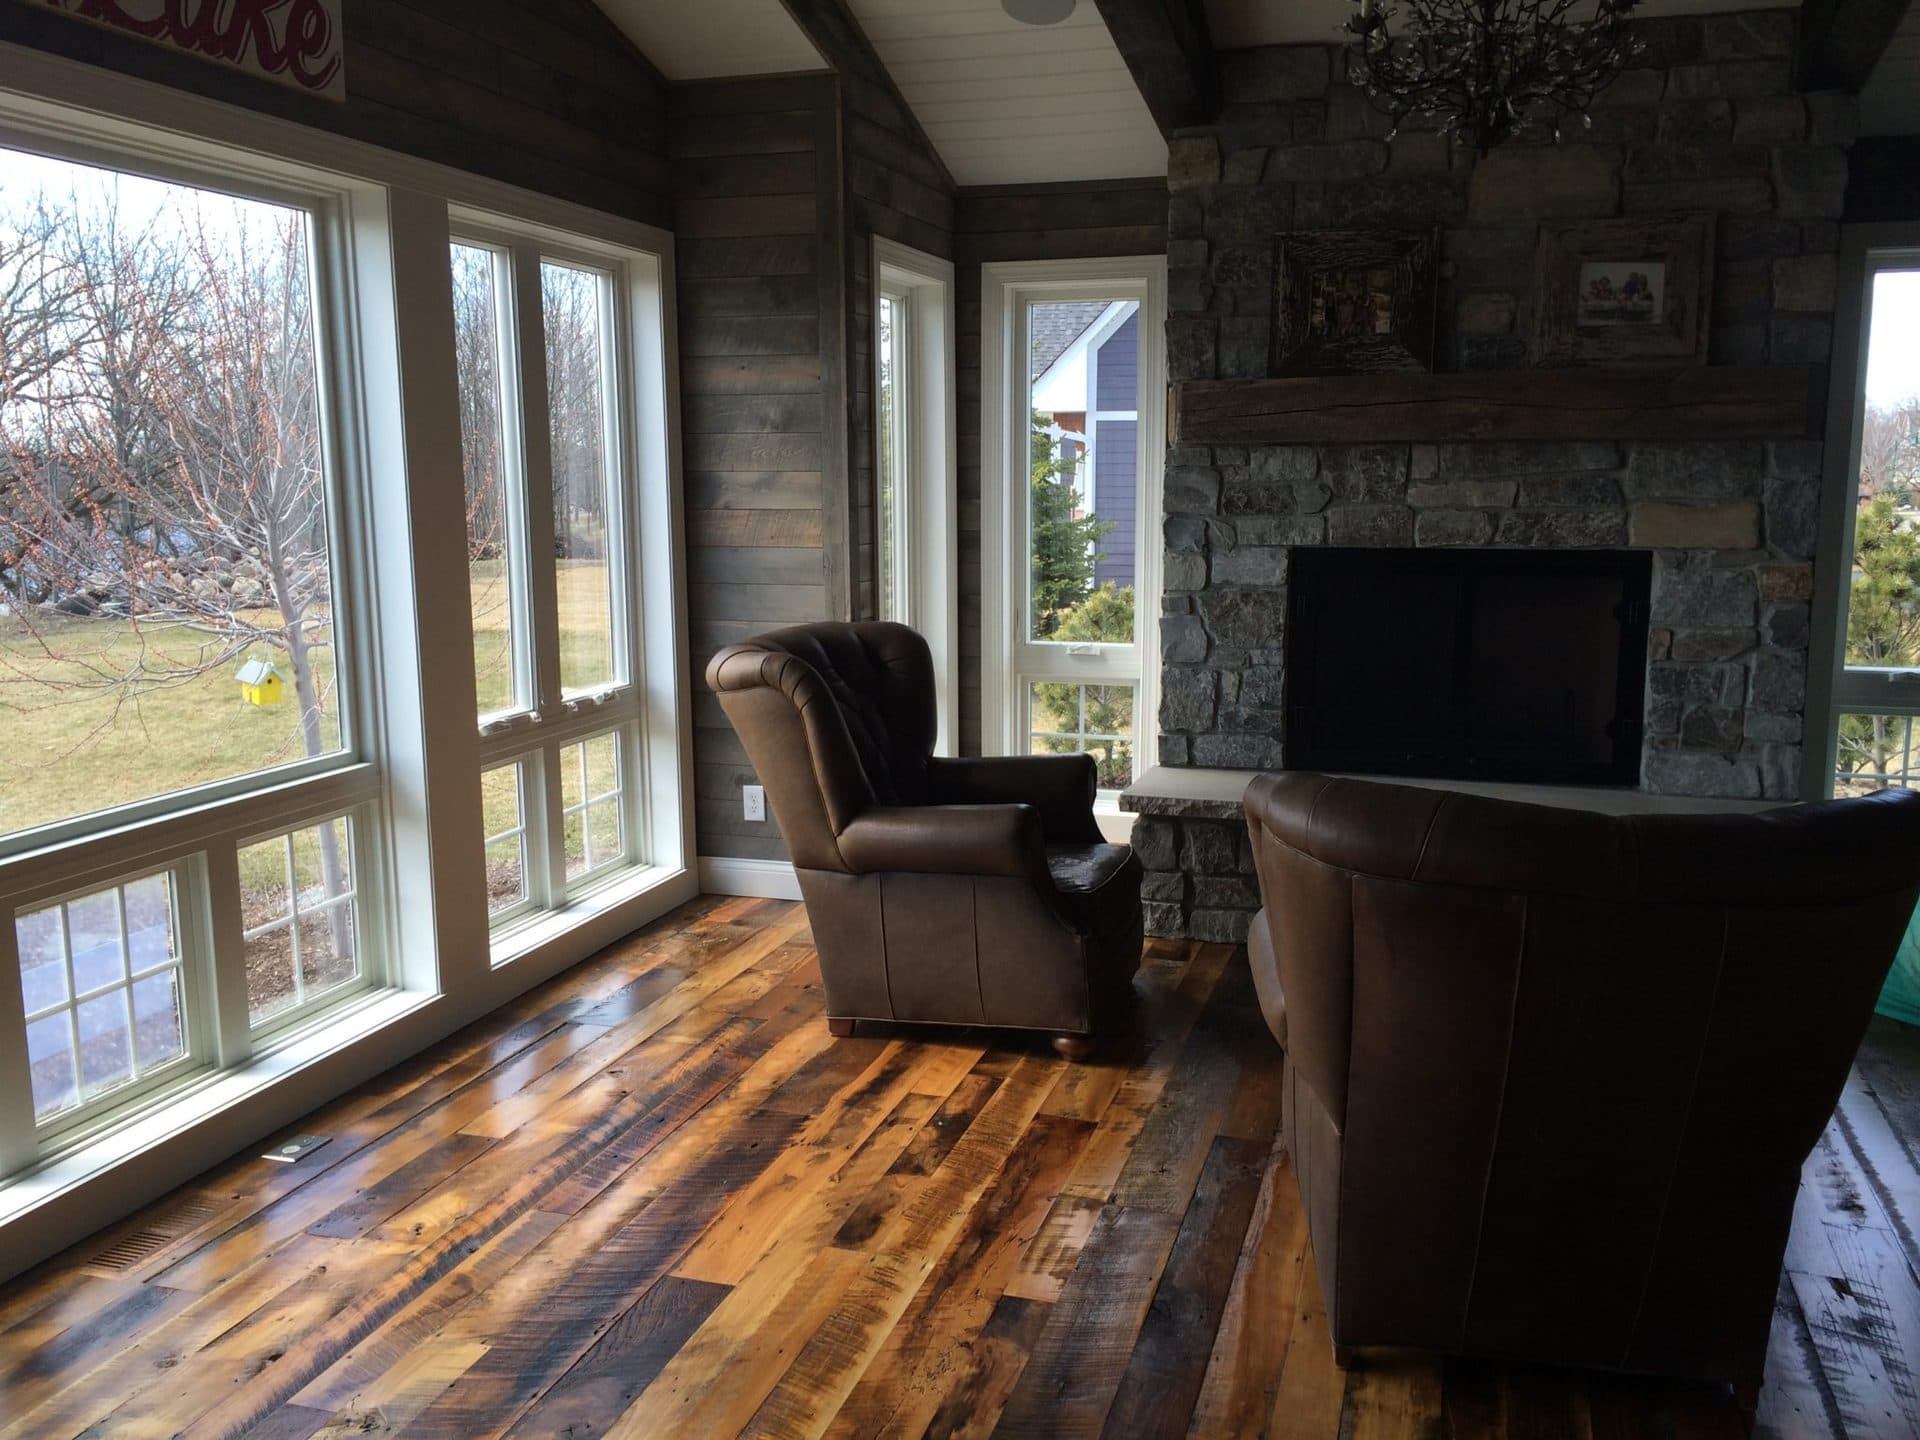 Living area with mixed reclaimed wood flooring